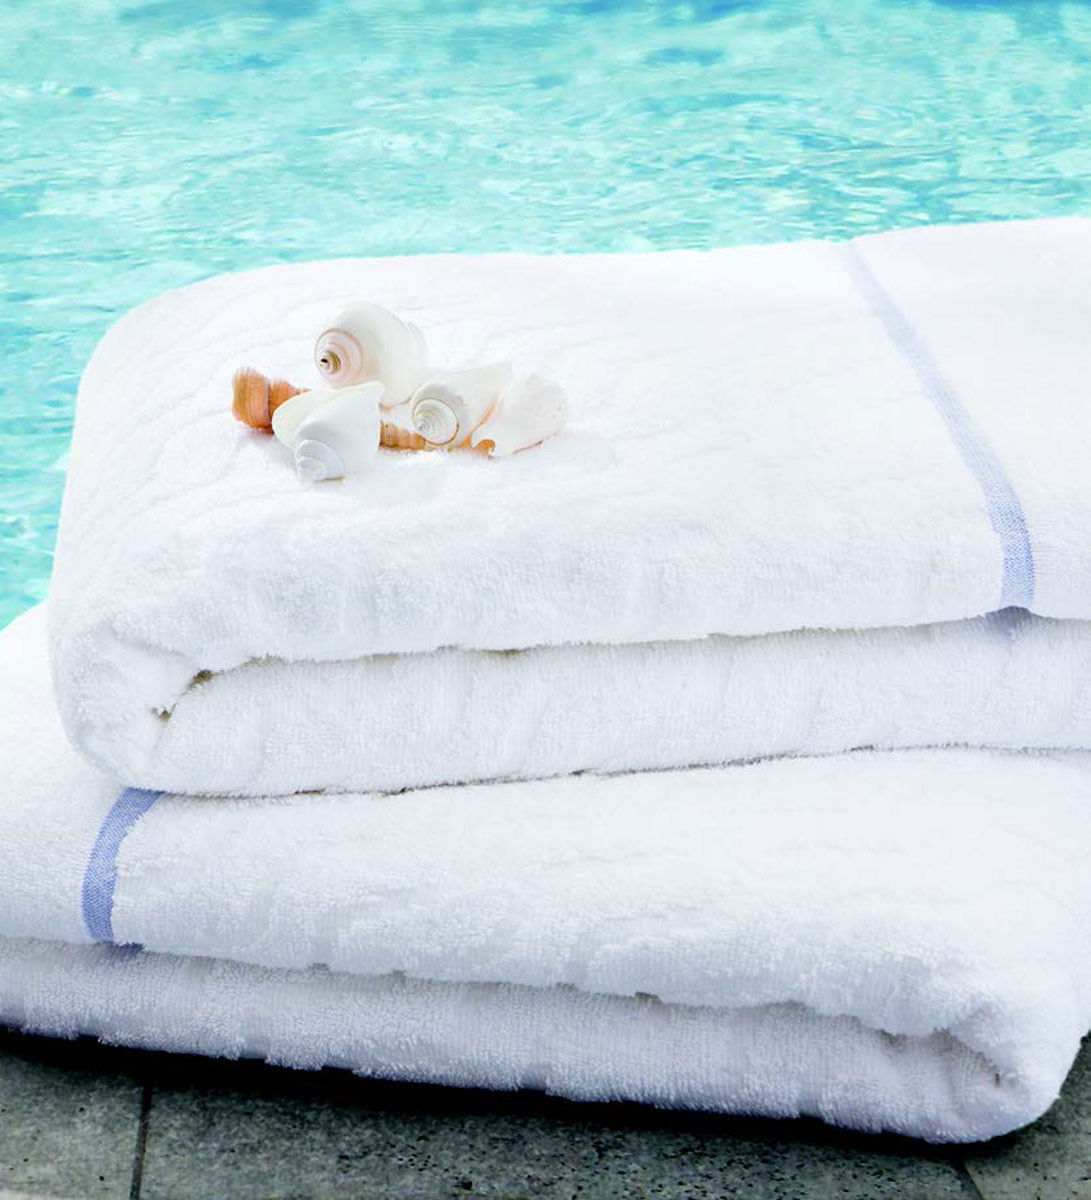 What is the comparison between eurospa towels and traditional pool towels?